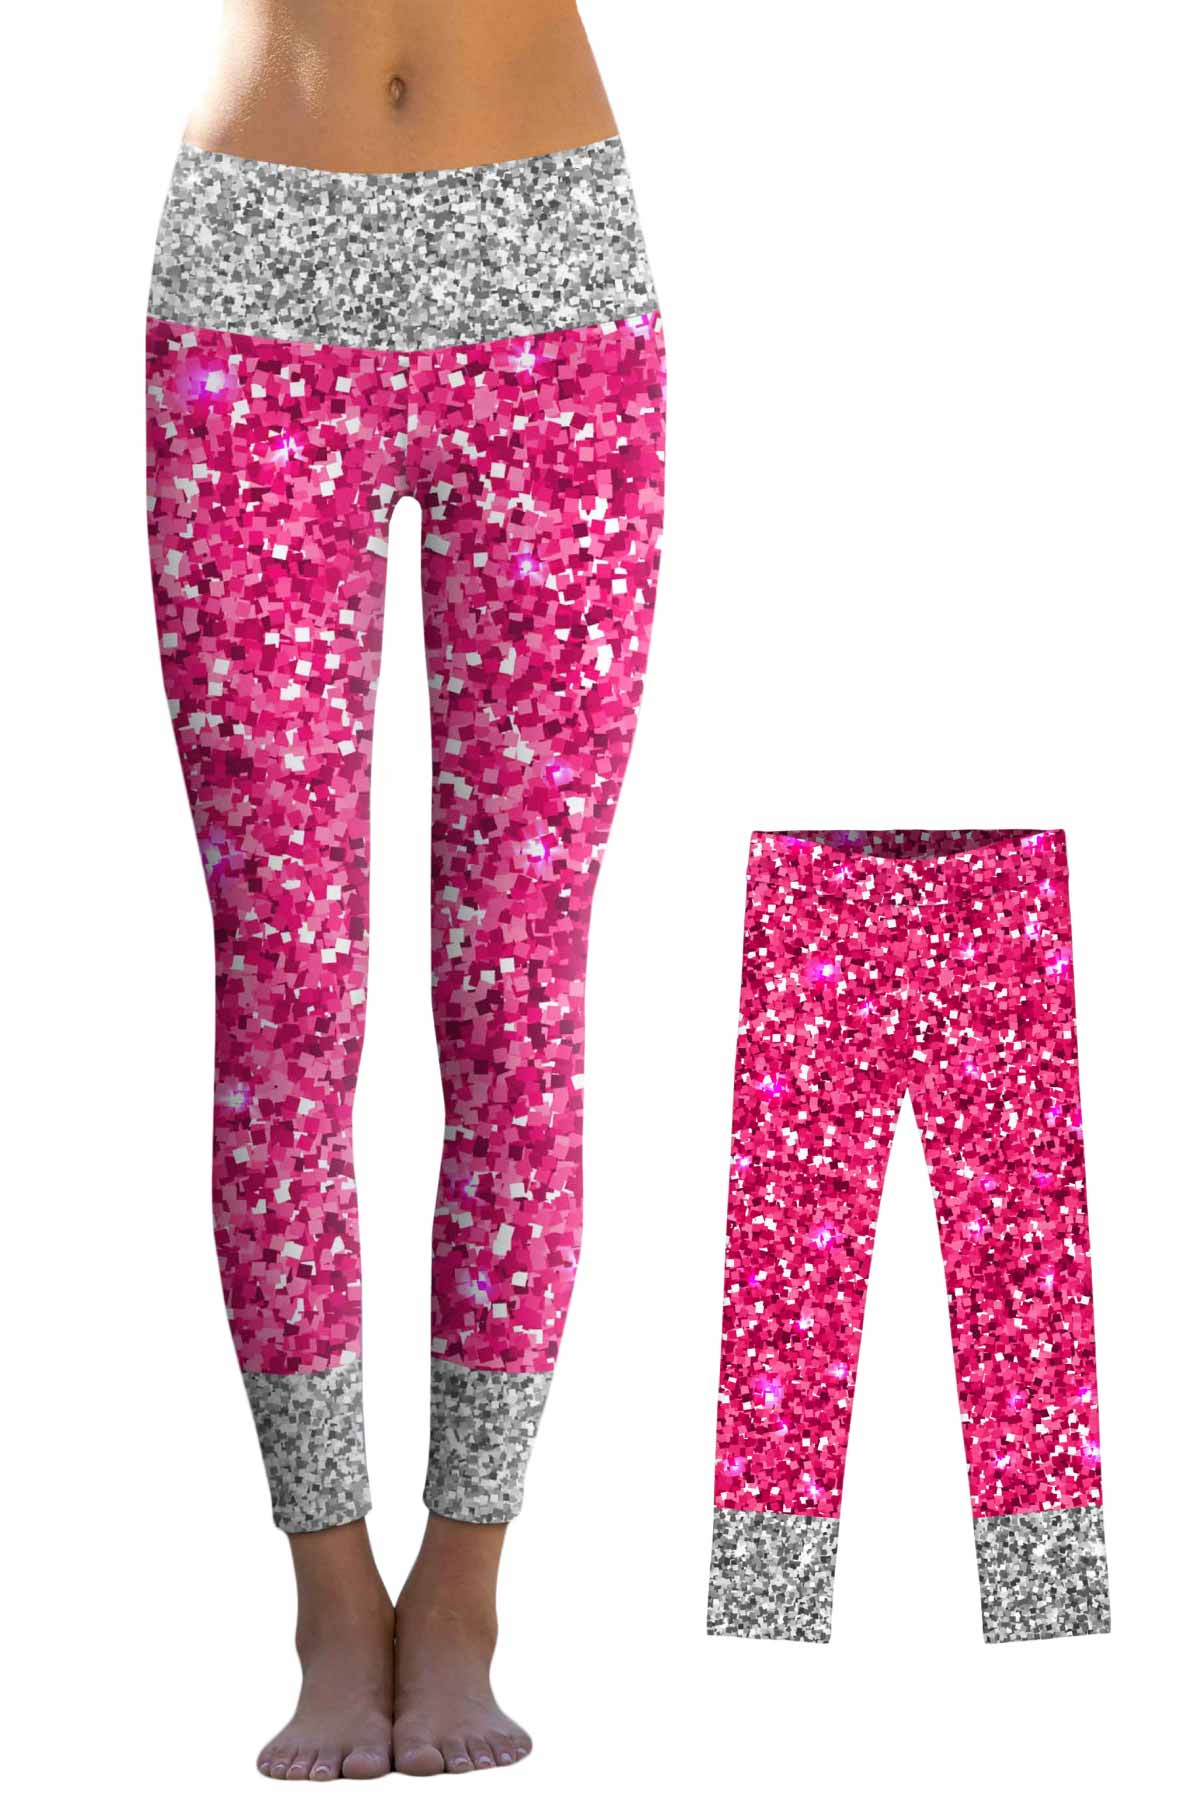 Glam Doll Lucy Pink & Silver Glitter Print Leggings - Mommy and Me - Pineapple Clothing